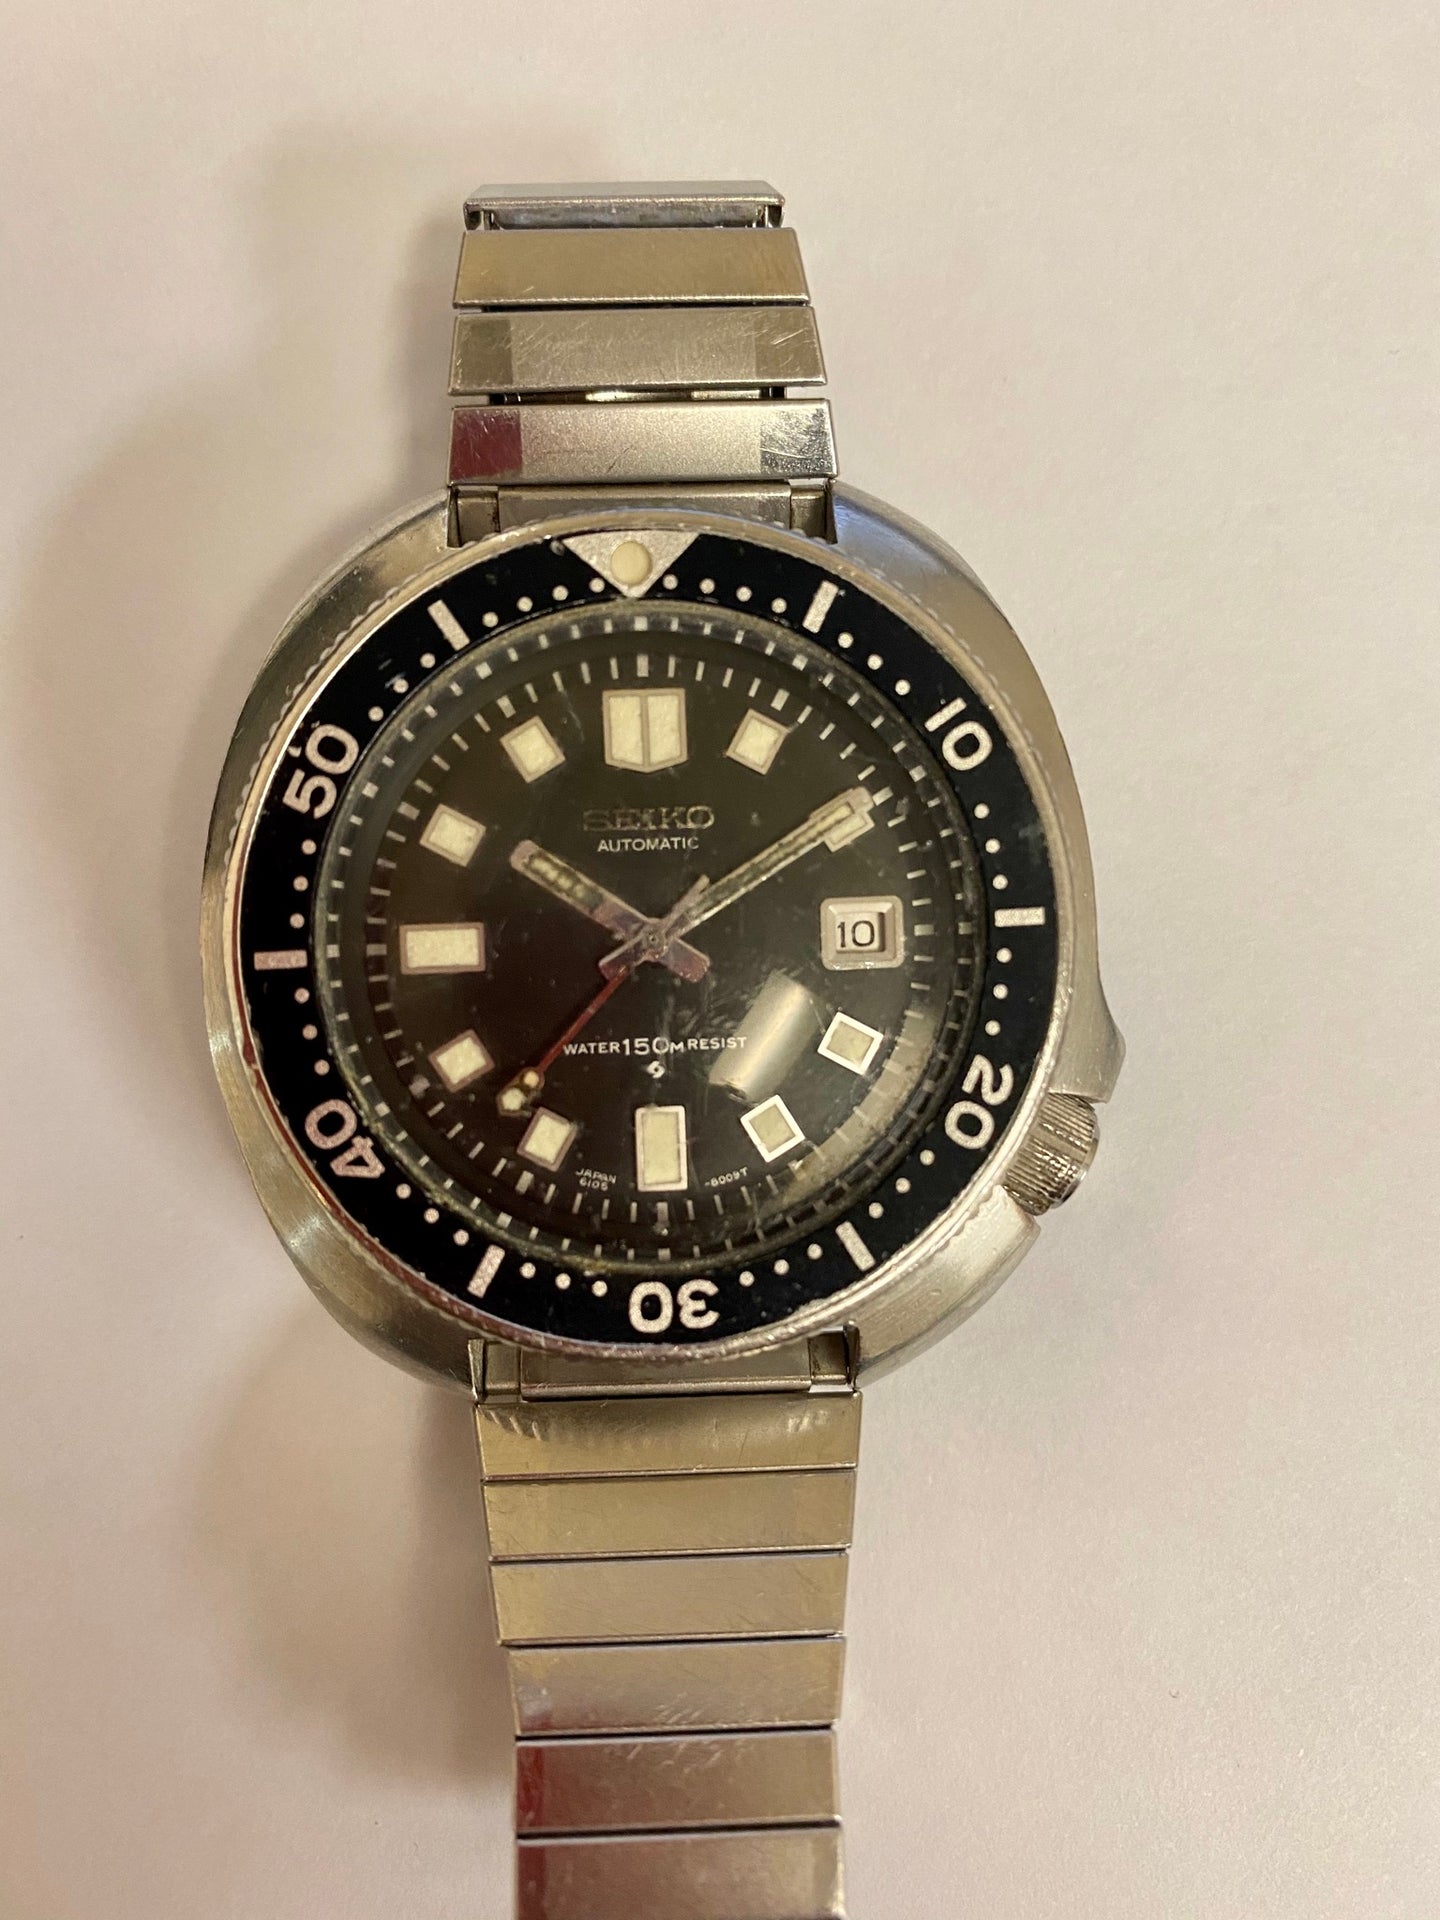 Seiko 6105-8119 Restoration possible? | The Watch Site